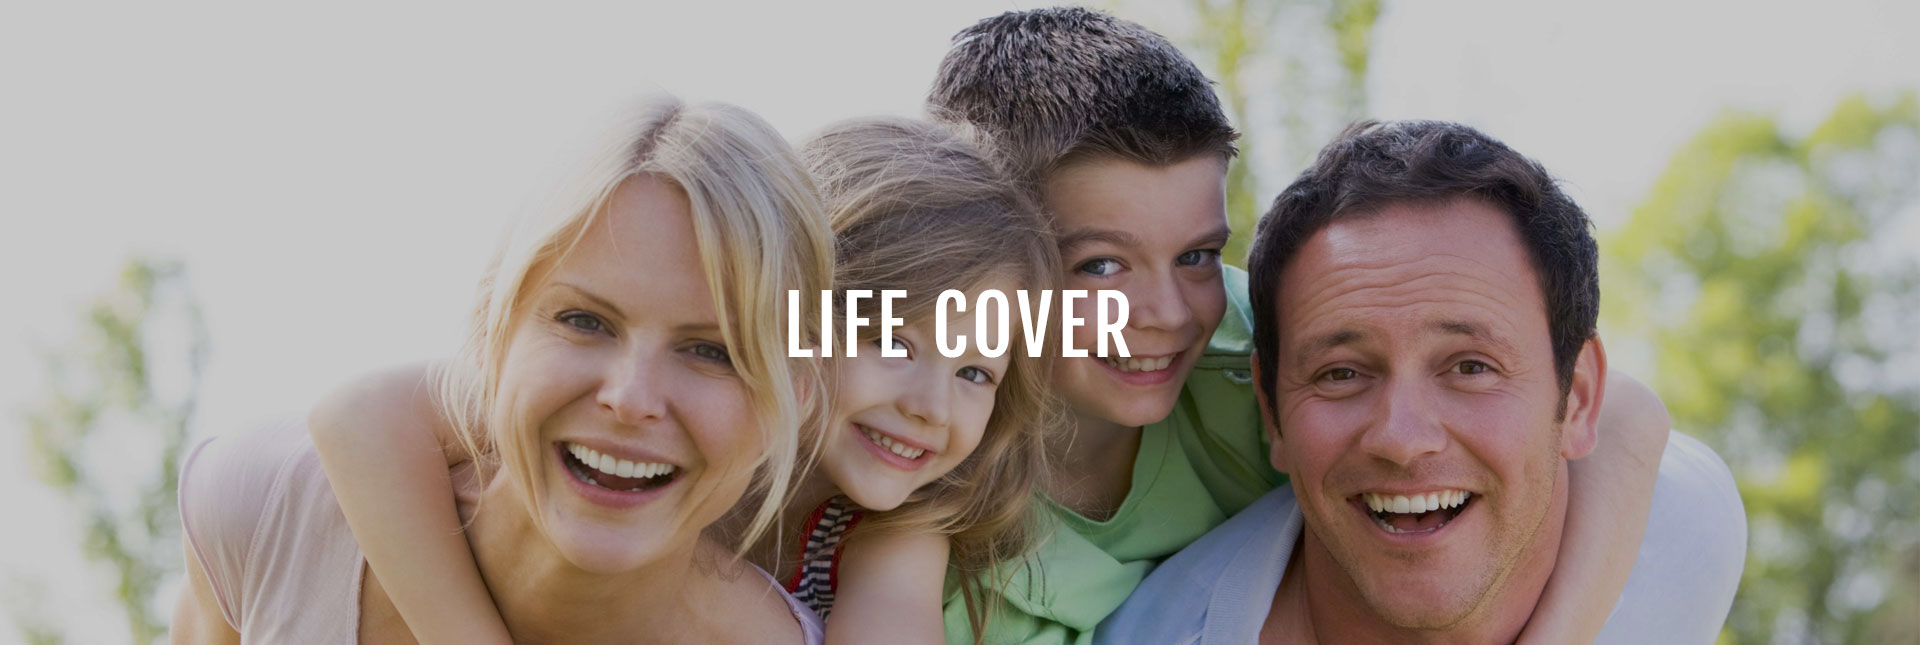 Life cover, life insurance, wills, endowment policies, critical illness benefits